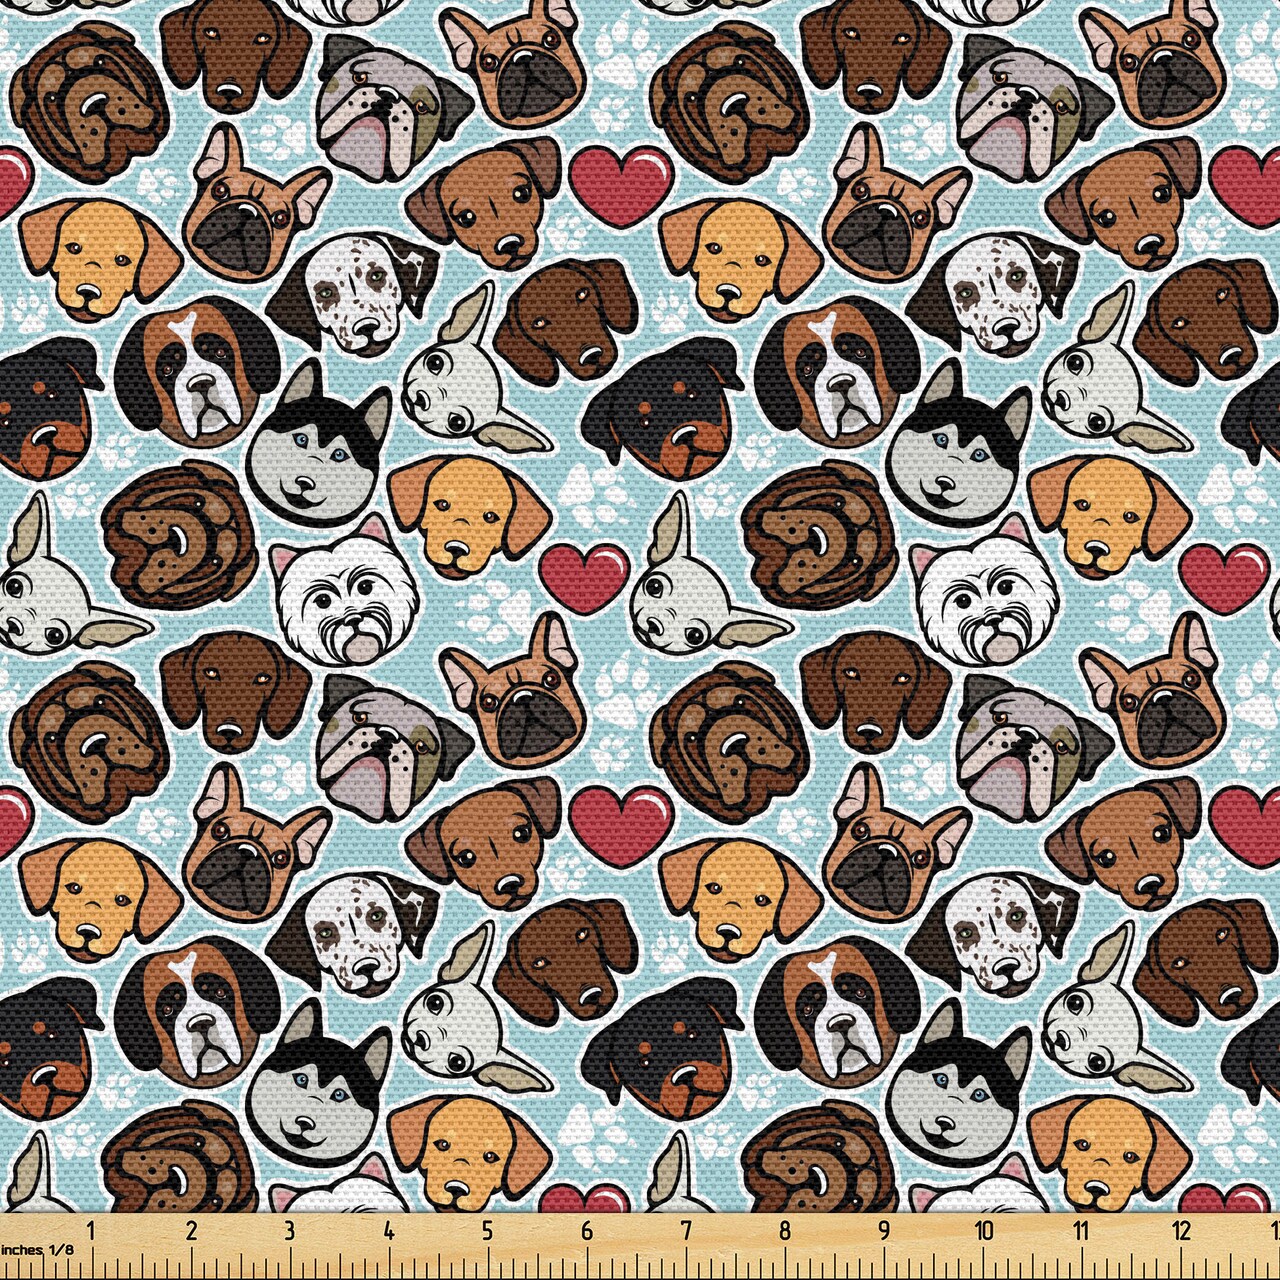 Ambesonne Dog Lover Fabric by the Yard, Canine Breeds Bulldog Chihuahua Siberians and Retriever Love Heart Paw Prints, Decorative Fabric for Upholstery and Home Accents, 2 Yards, Brown Blue